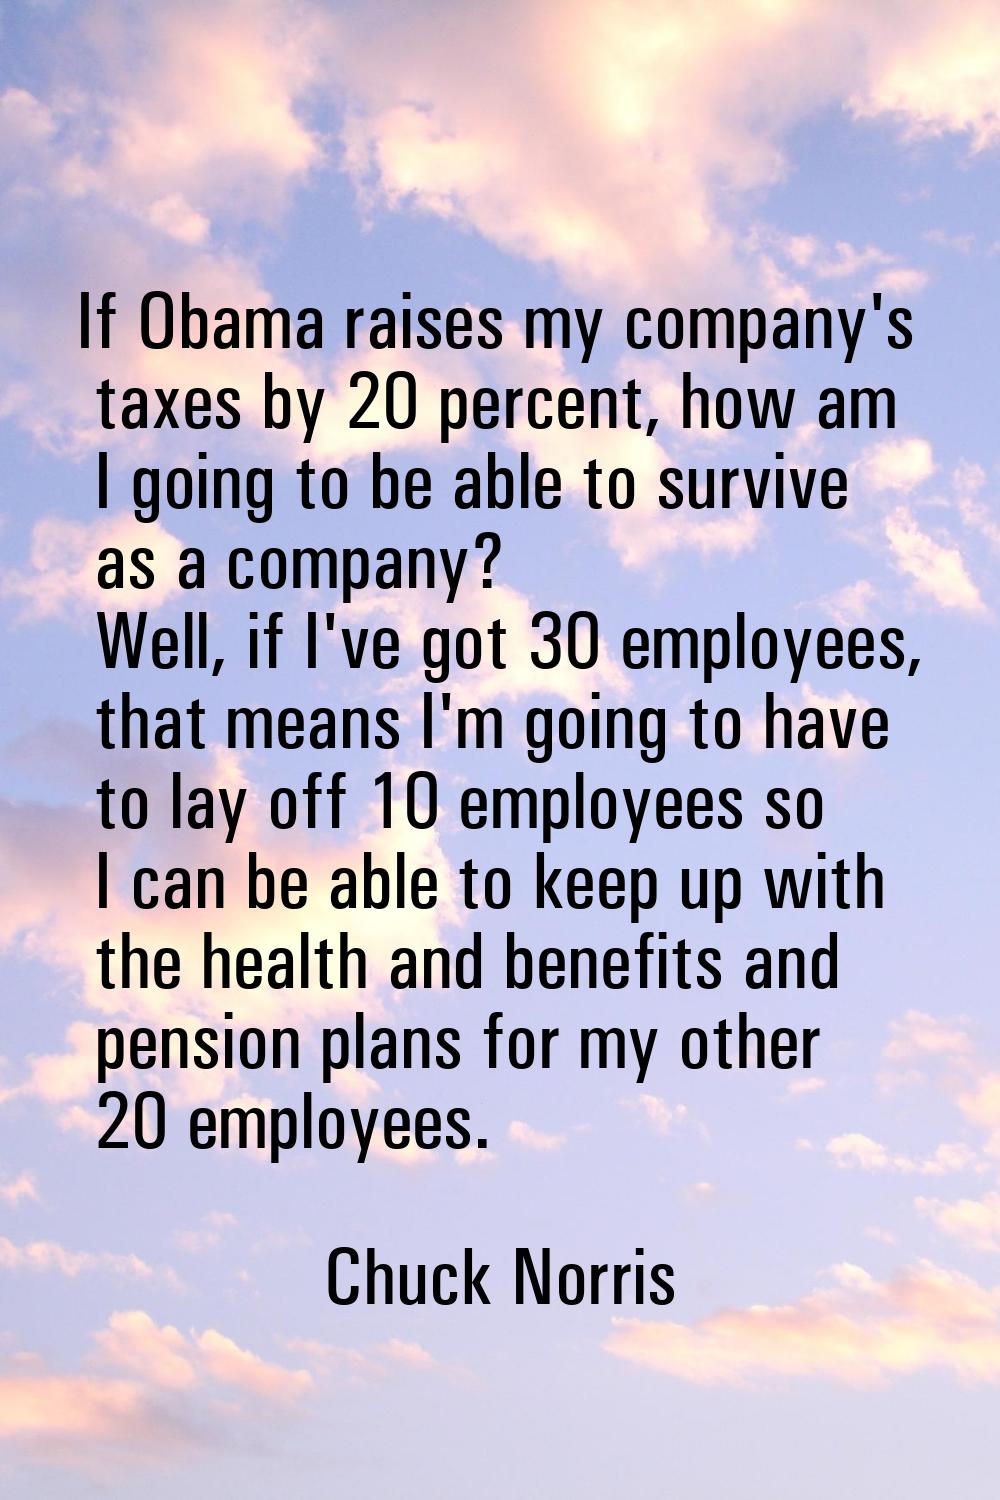 If Obama raises my company's taxes by 20 percent, how am I going to be able to survive as a company